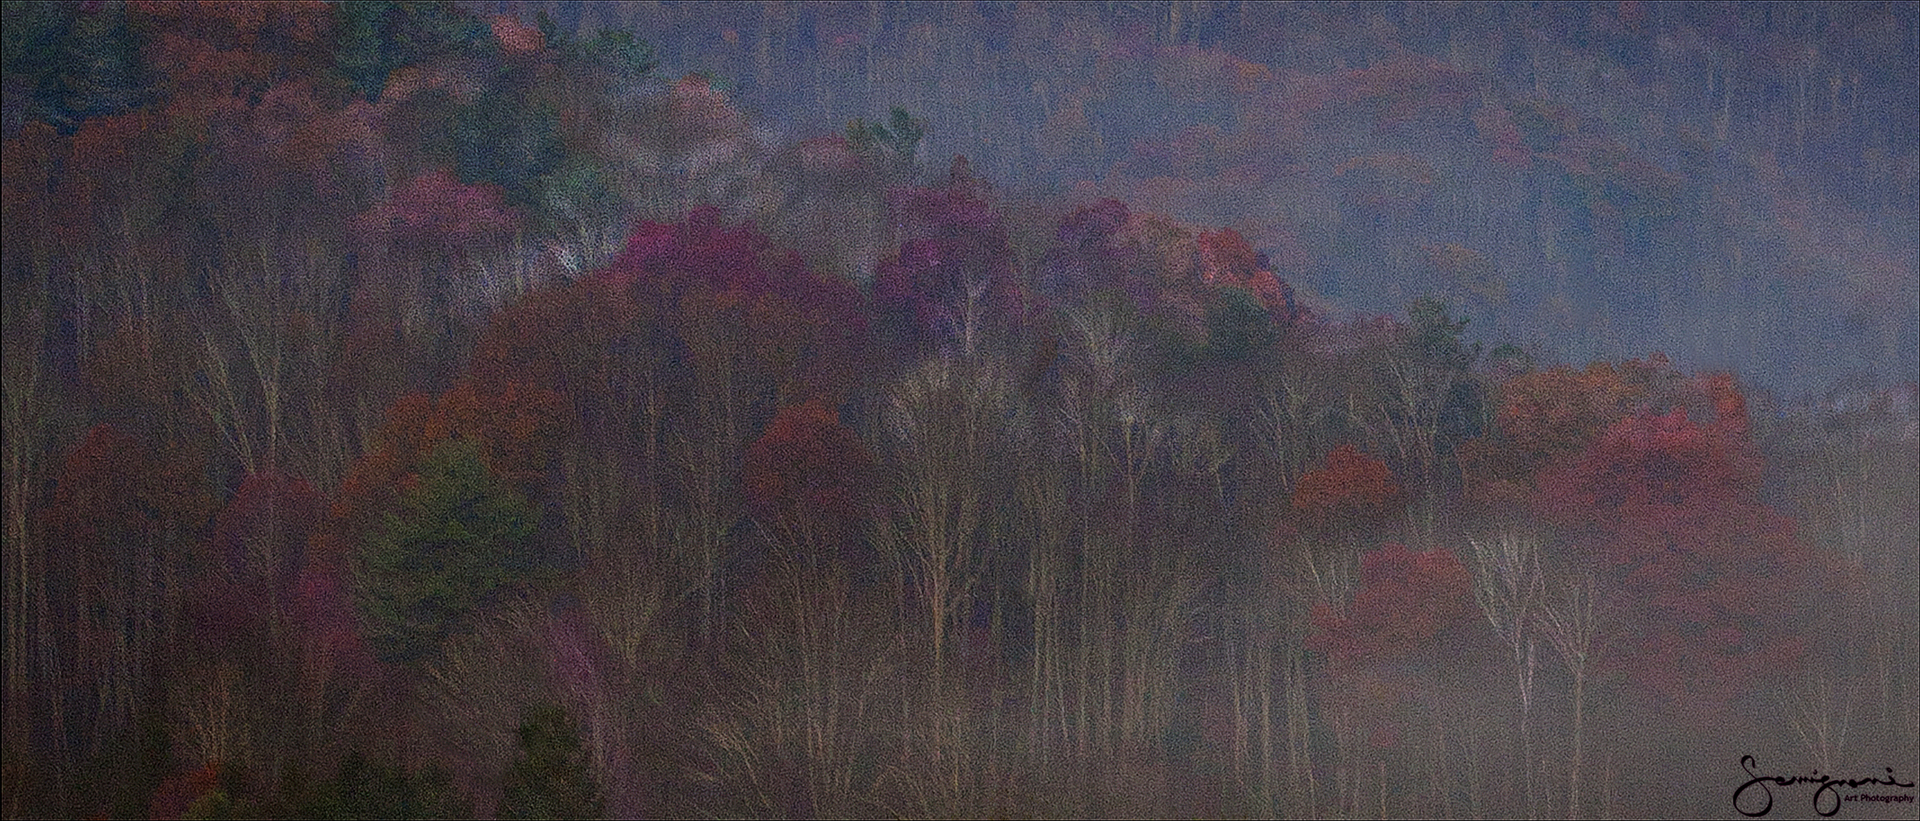 Colorful Trees in Fog "Panorama"